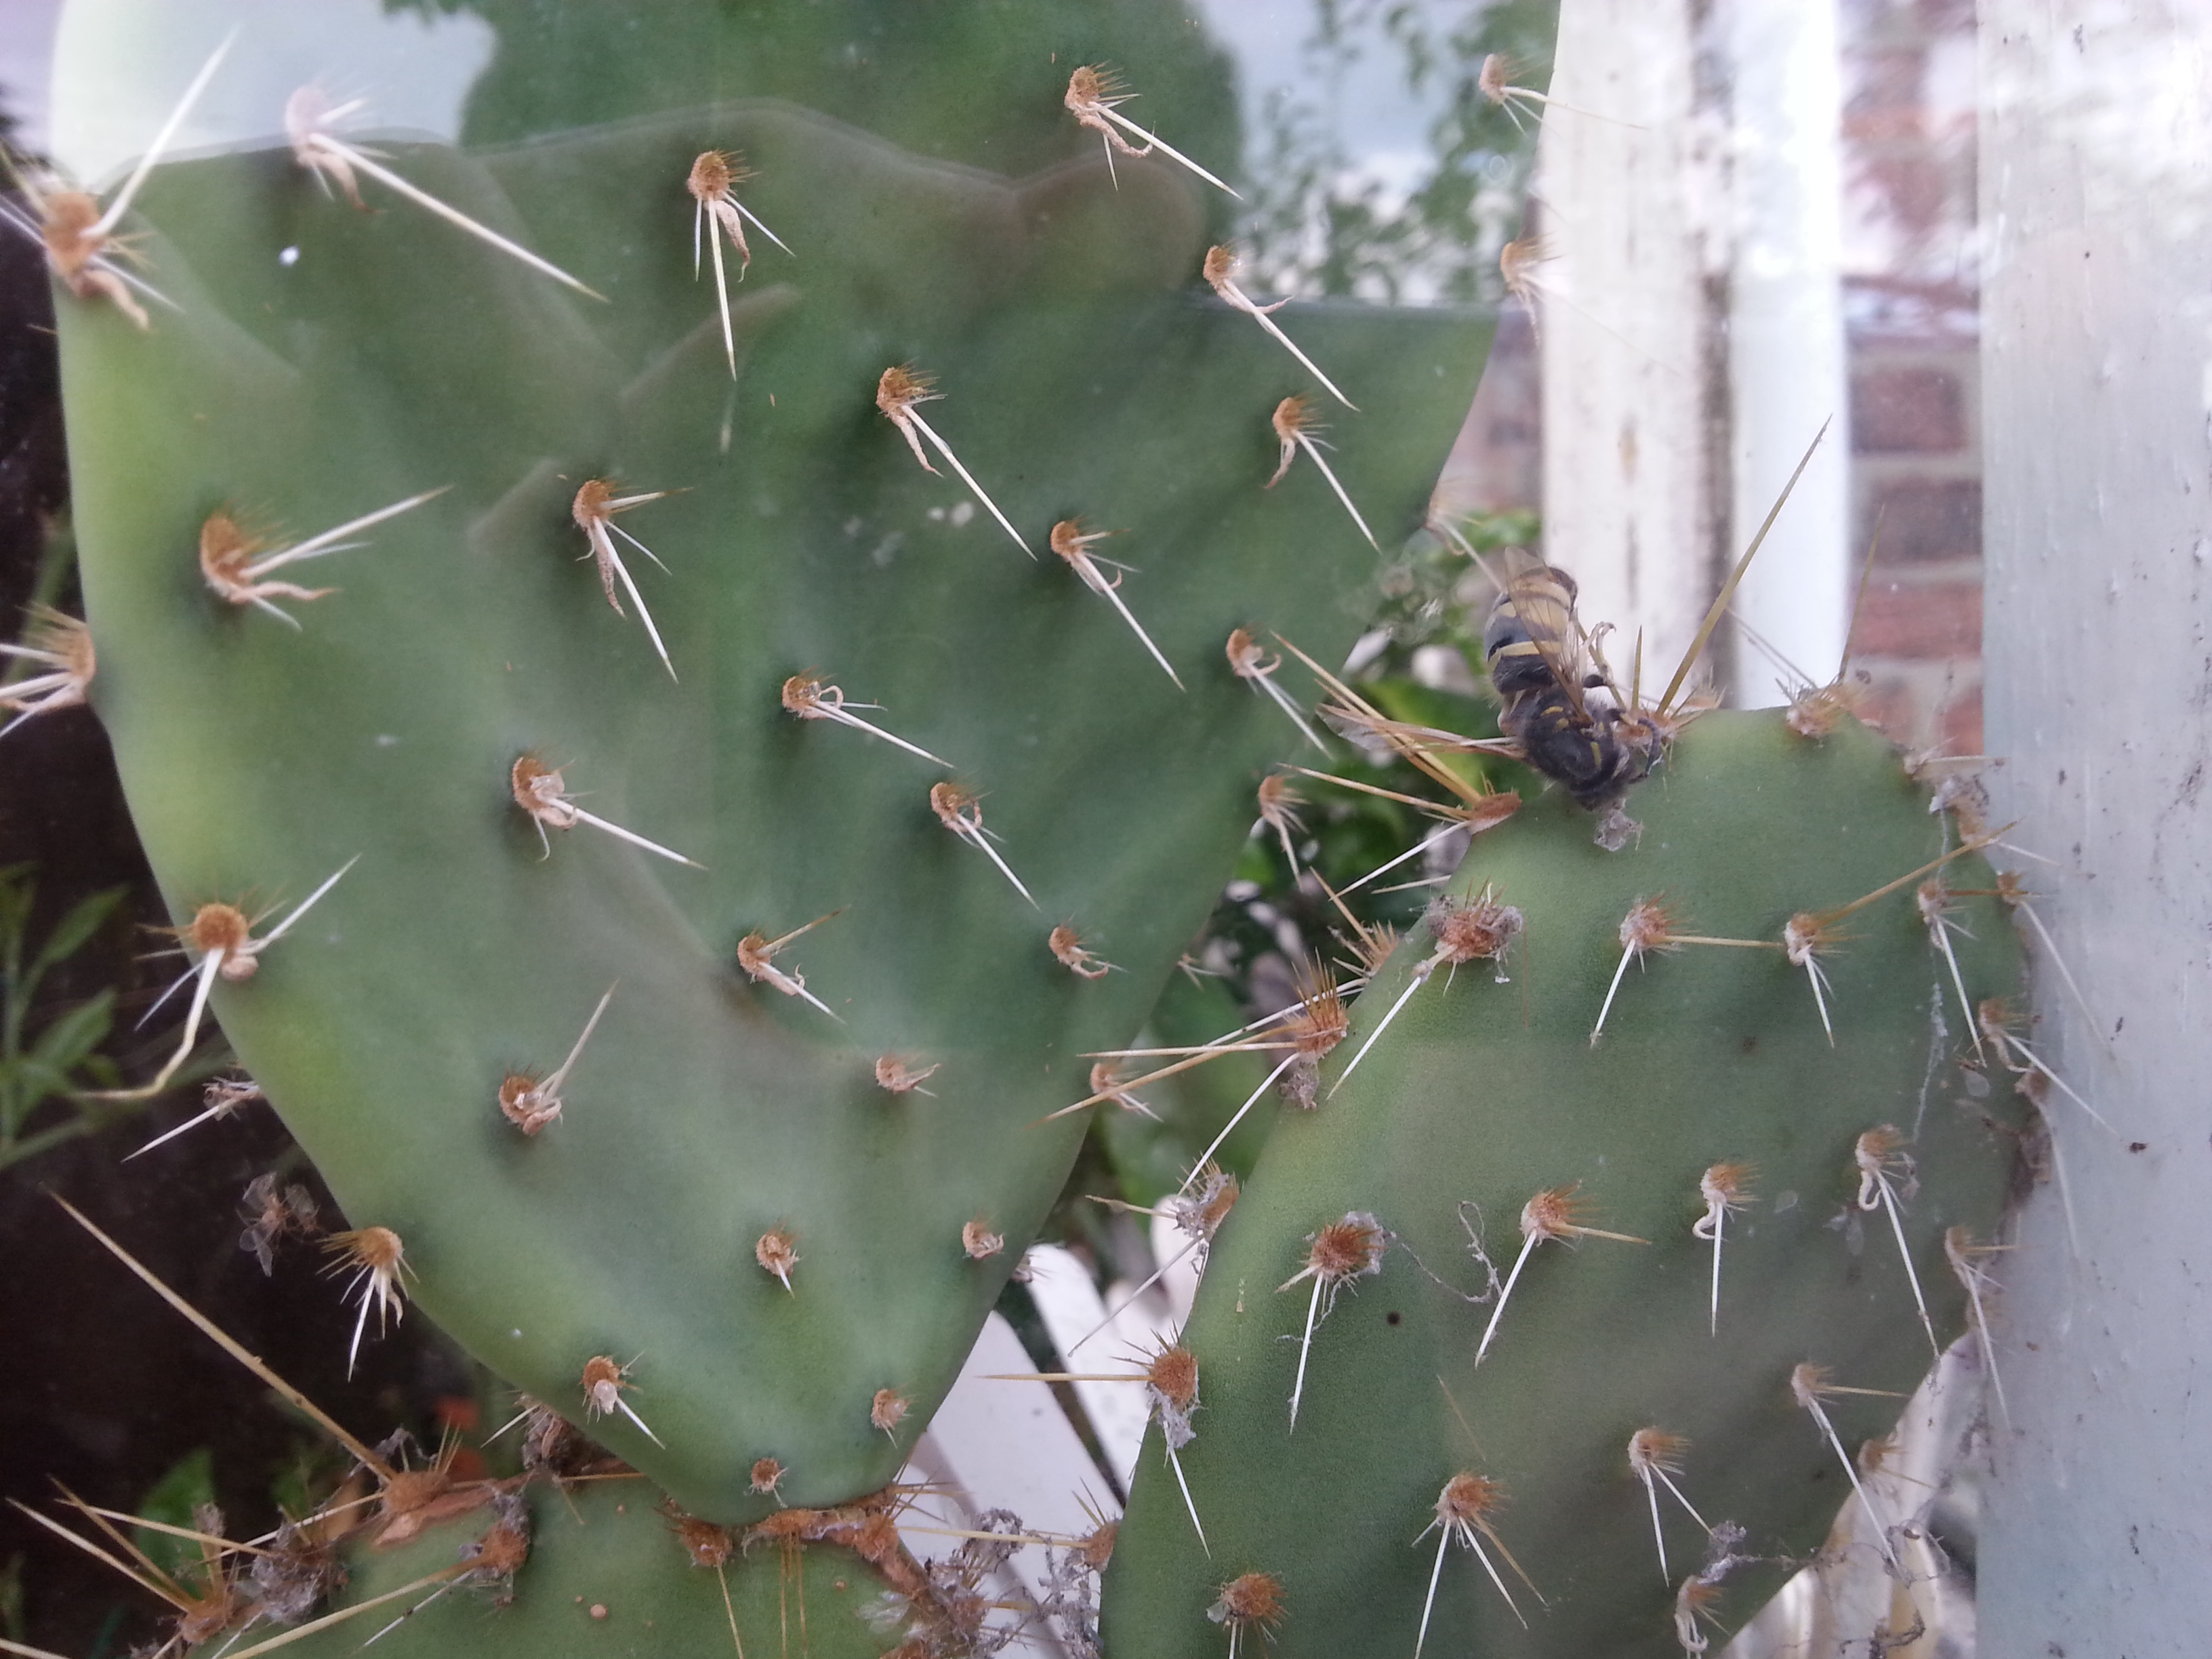 Wasp committed suicide by impaling itself on a cactus.